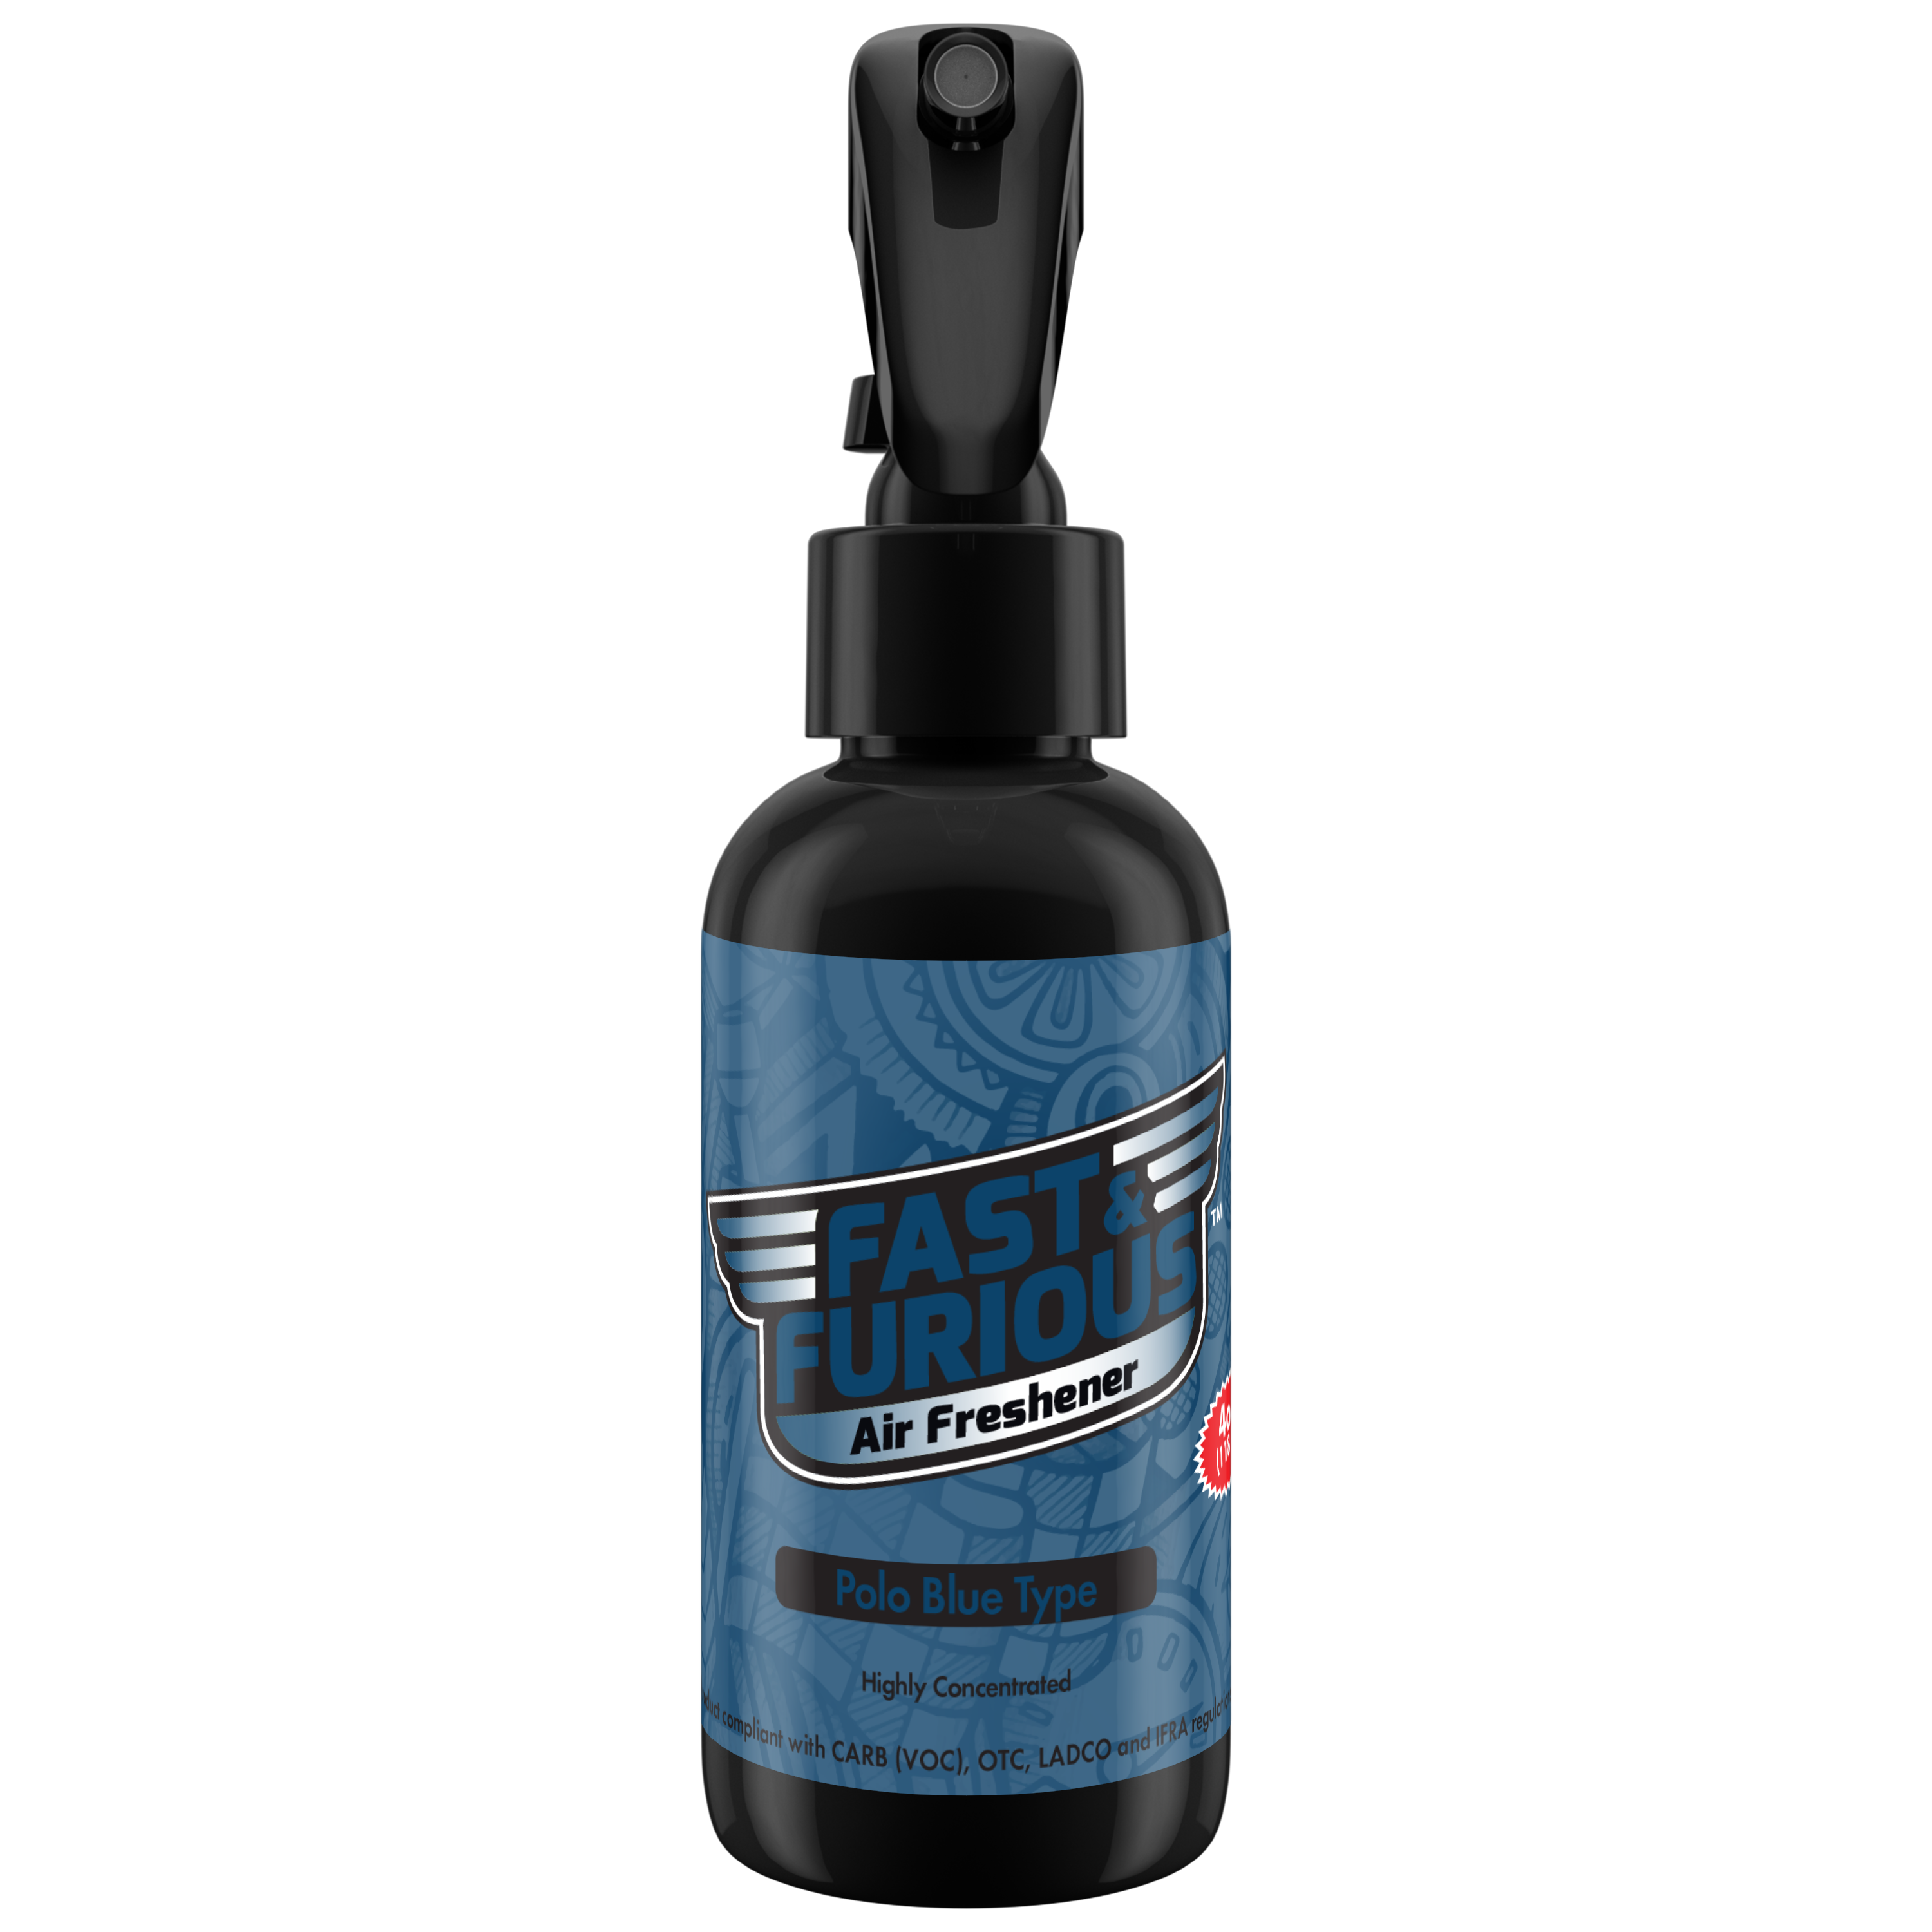 Fast and Furious Air Freshener - Polo Blue Type